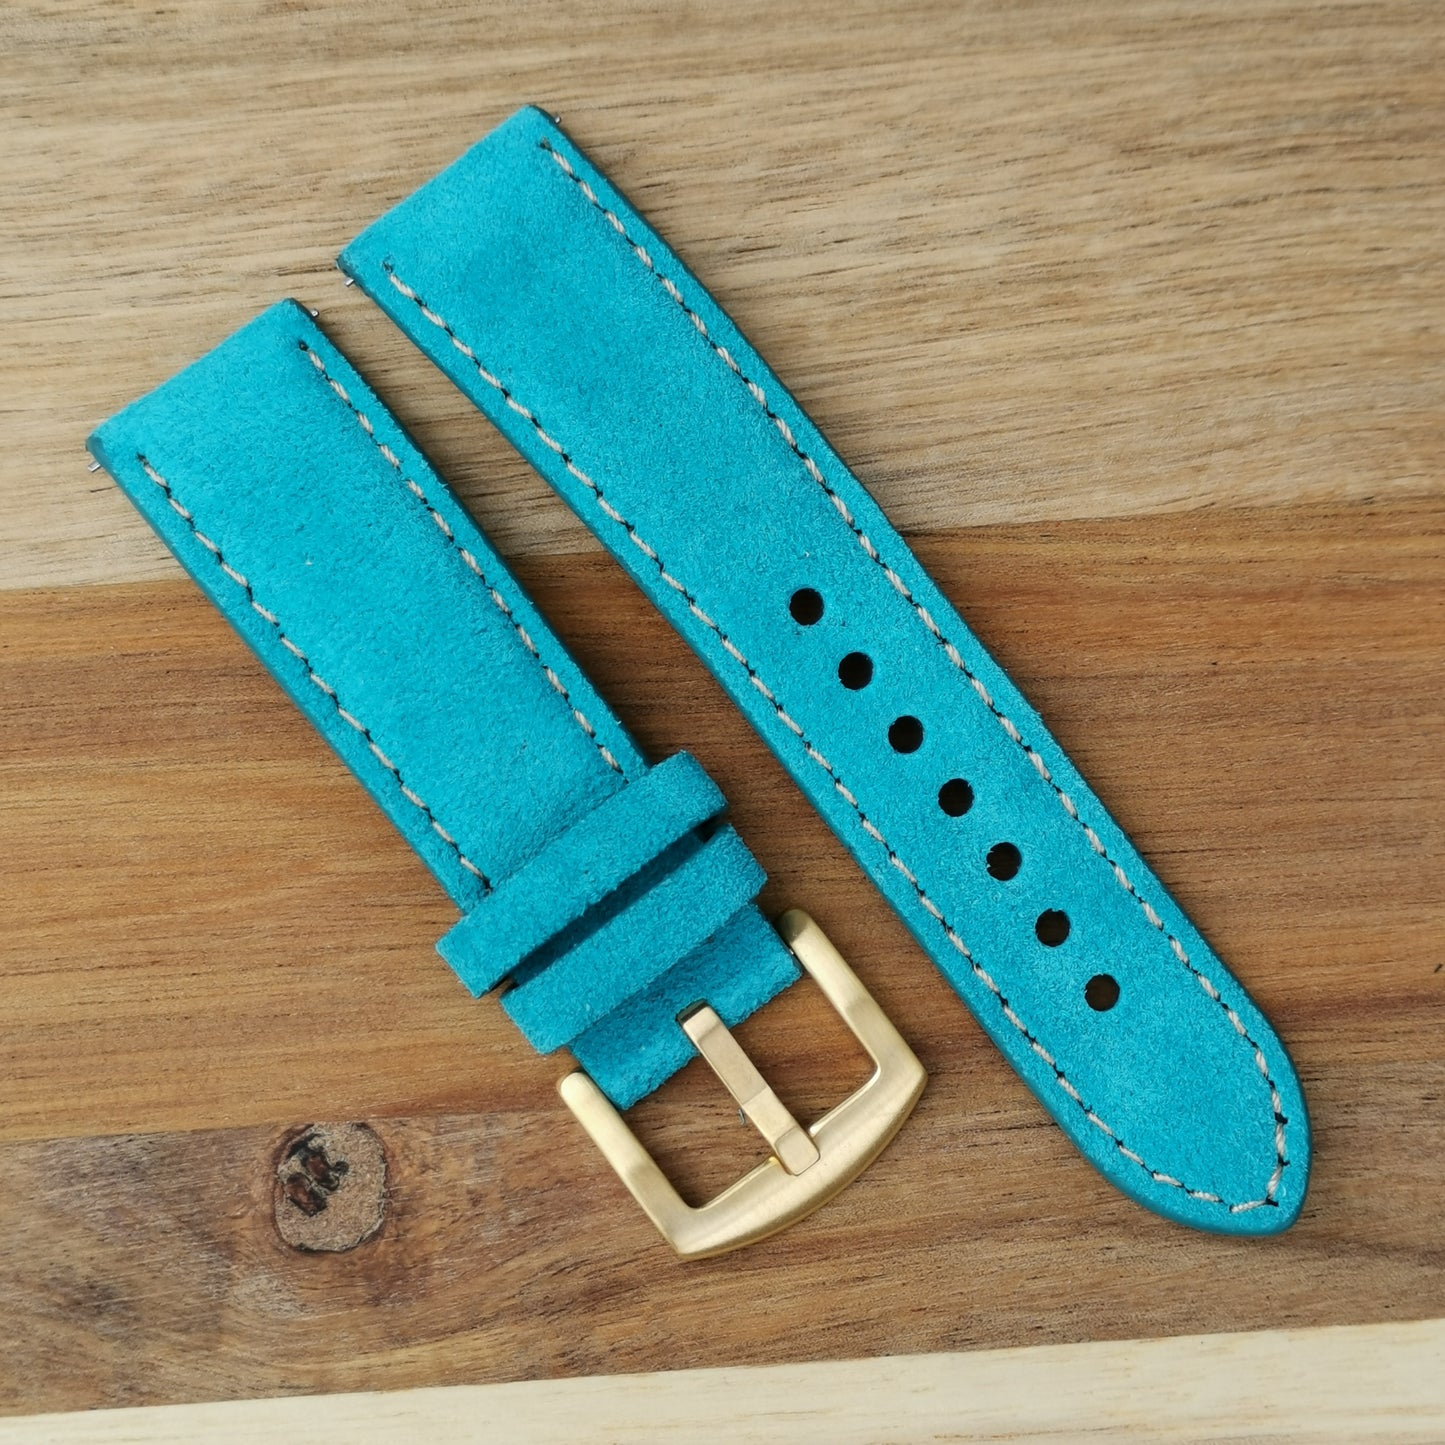 Paris turquoise suede watch strap with contrast ivory stitching. 18mm, 20mm, 22mm, 24mm. PVD gold buckle. Watch And Strap.